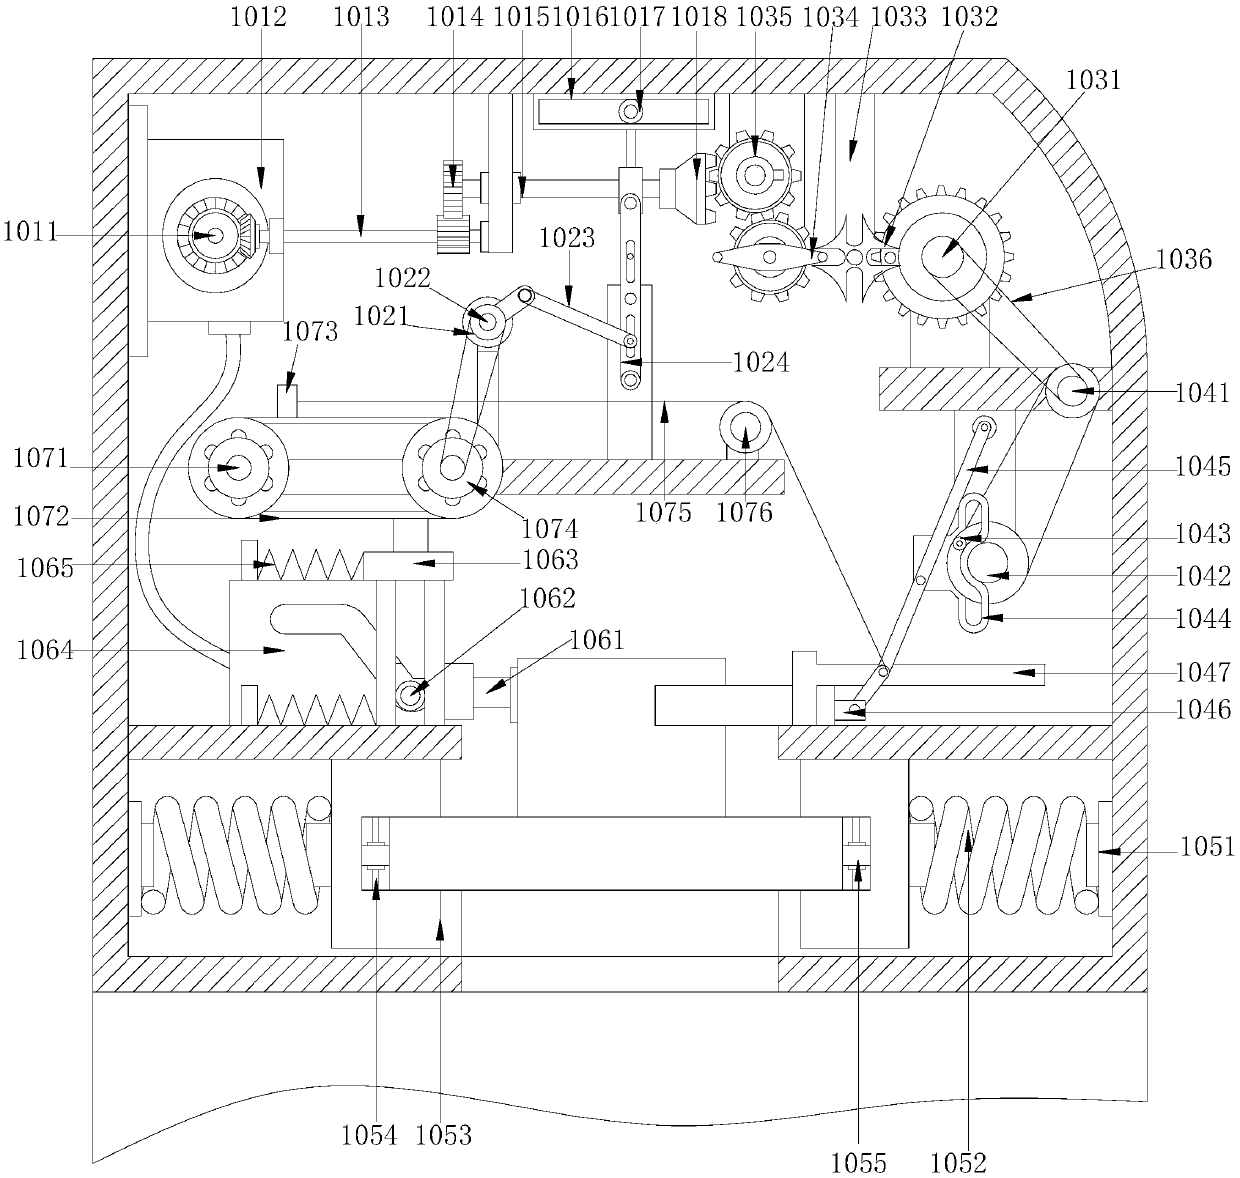 Anti-theft intelligent wearable device with encryption function